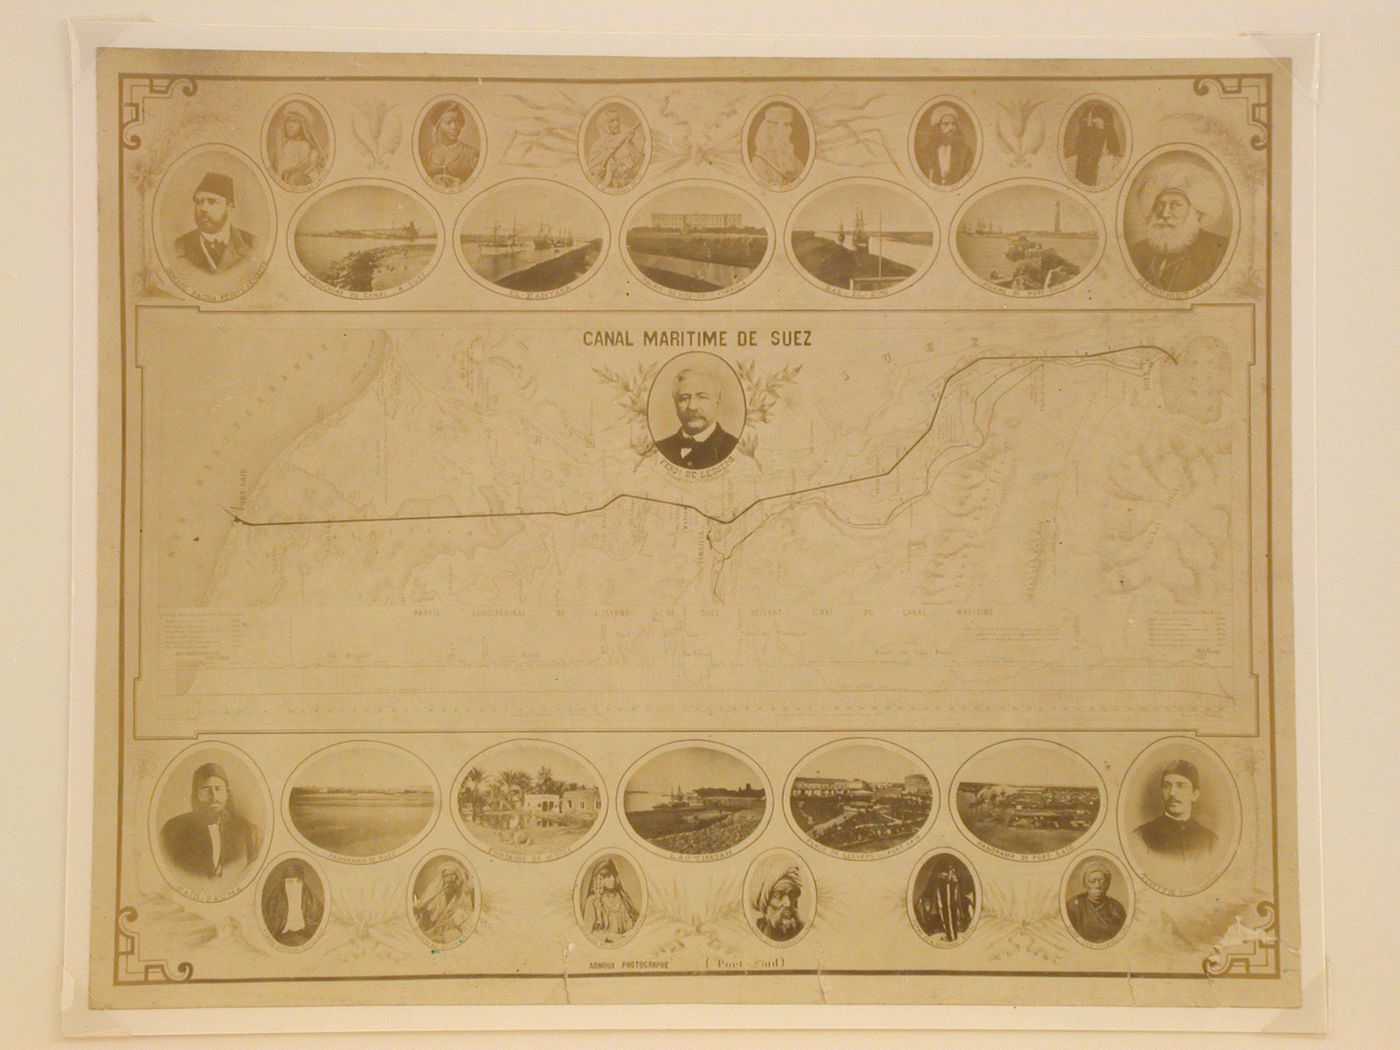 Canal Maritime de Suez: map of route of Suez Canal, and views of principal points along the route, local Egyptian officials and major figures of the canal constuction, Suez, Egypt